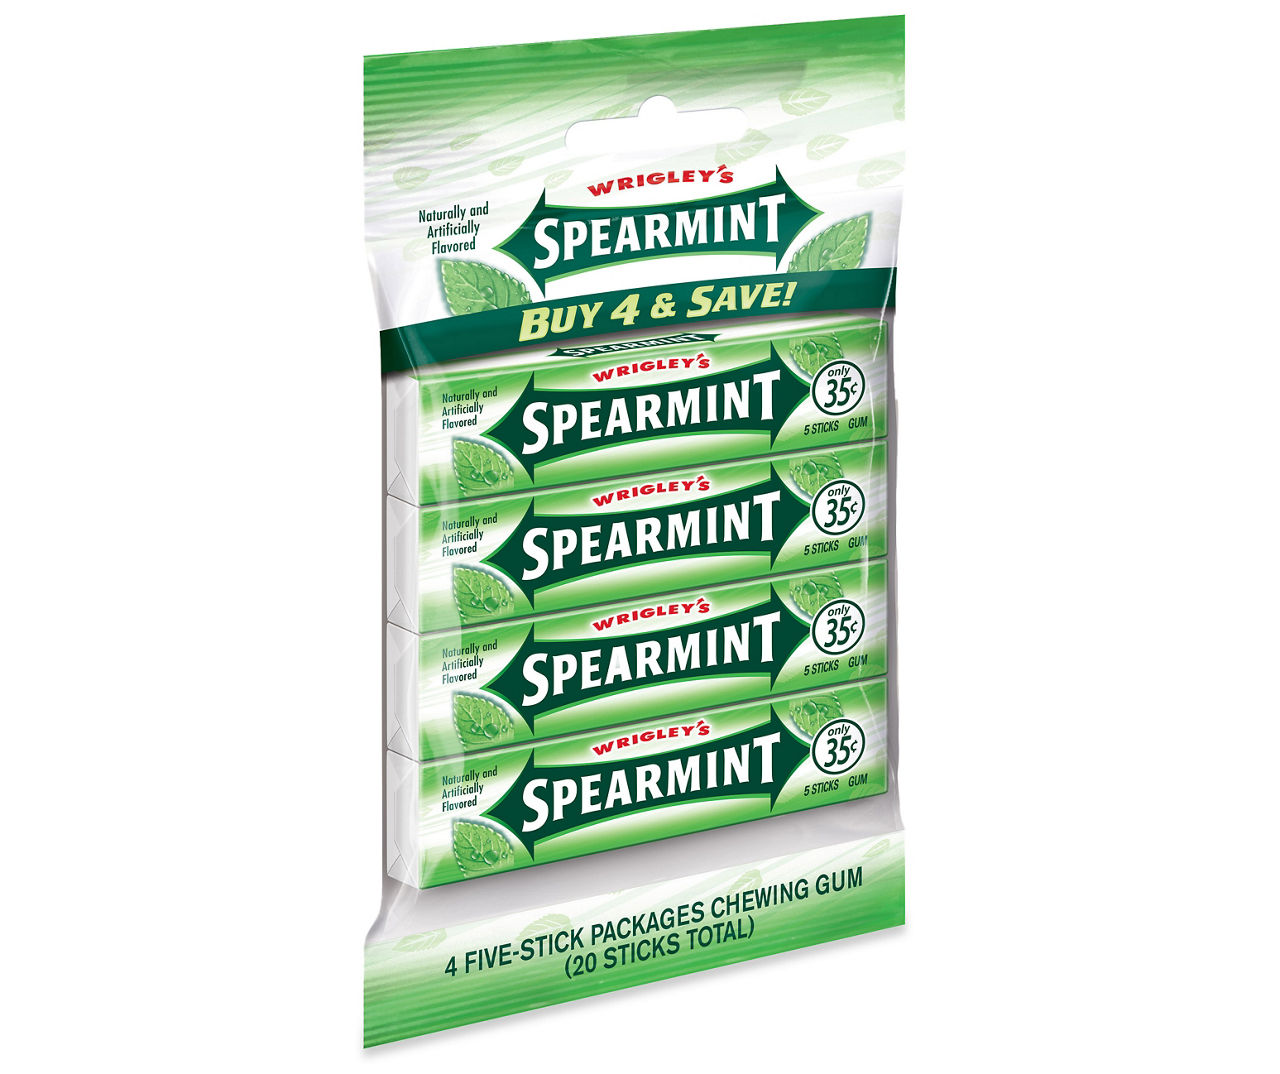 Wrigley's Freedent, Spearmint Chewing Gum, 5 Piece Packs, 8 Count